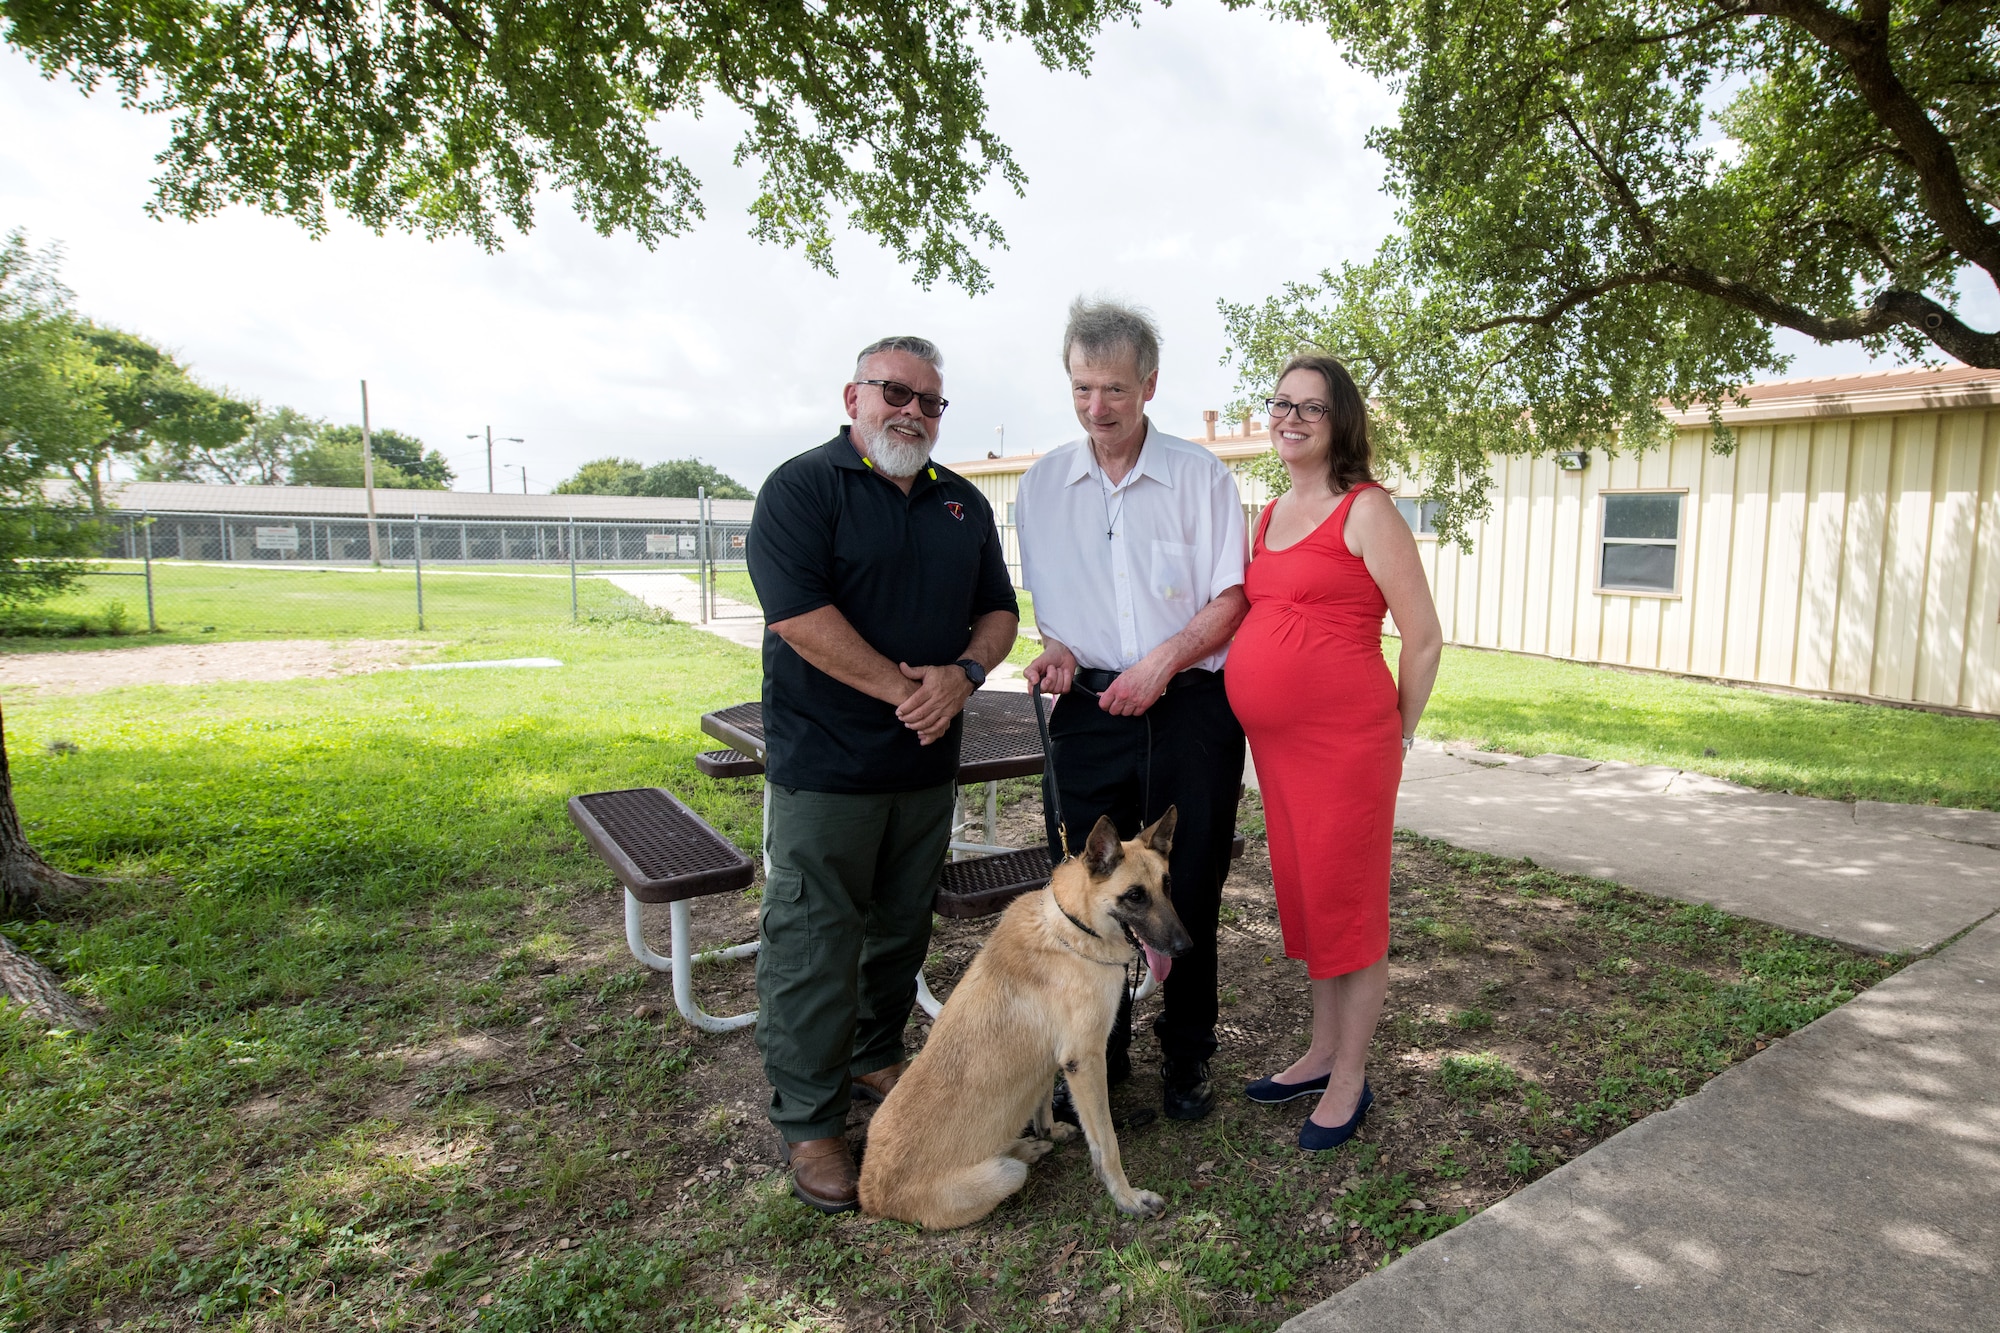 Jerry Britt (left), 341st Training Squadron adoptions and dispositions coordinator, professor Robert Klesges, and Melissa Little, 59th Medical Wing behavioral health preventive medicine researcher, pose for a photo with a military working dog (MWD) June 26, 2019, at Joint Base San Antonio, Texas